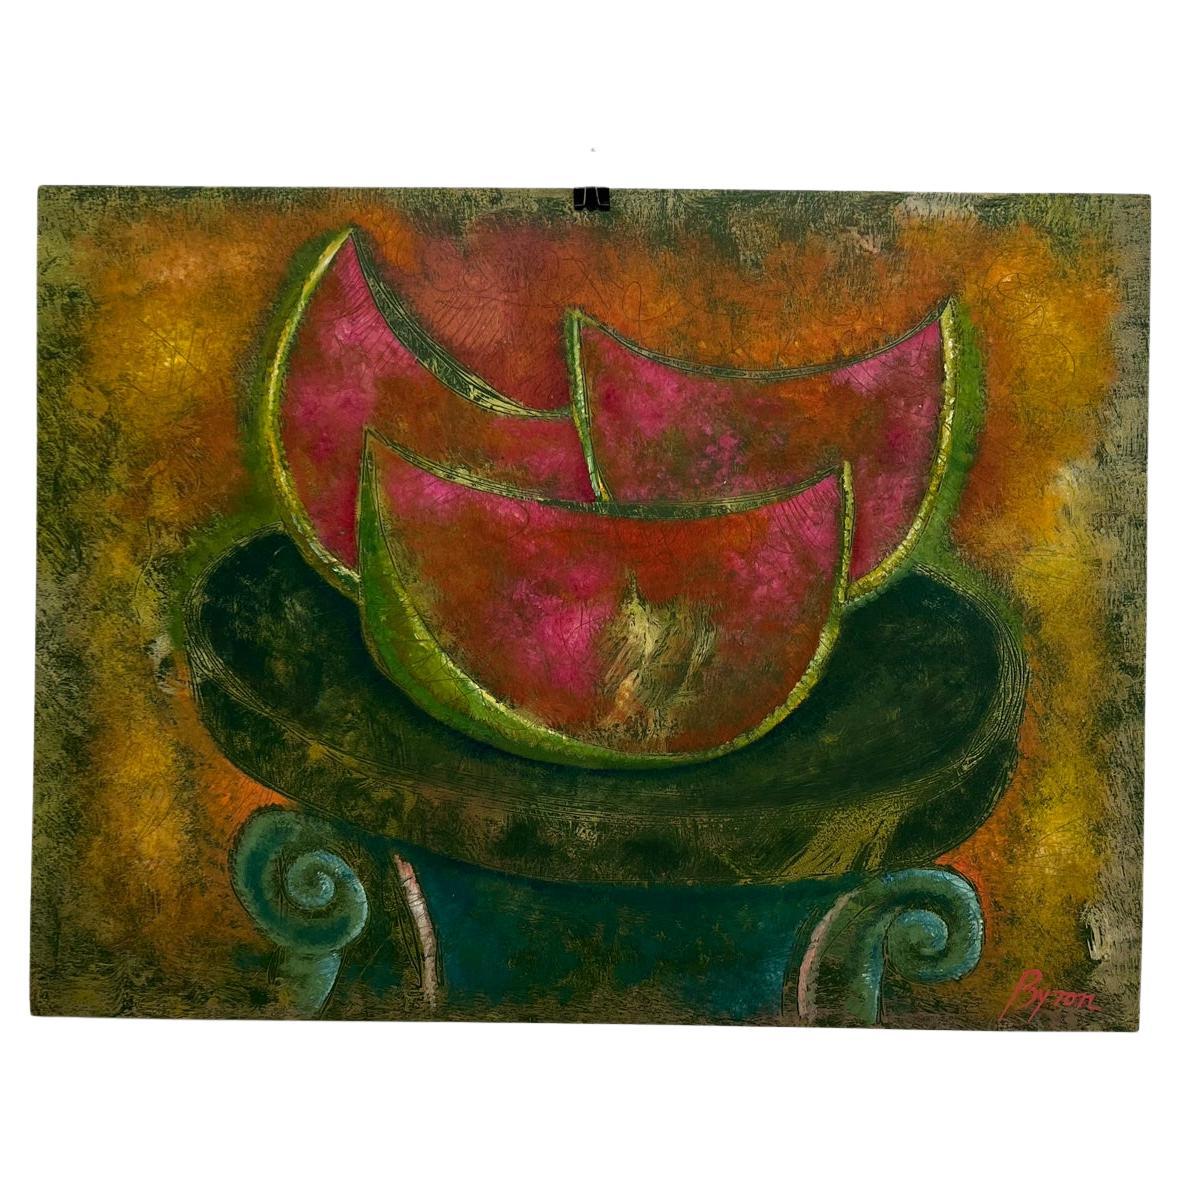 1980s Byron Gálvez Modernist Colorful Abstract Artwork Pink Fruit Mexico